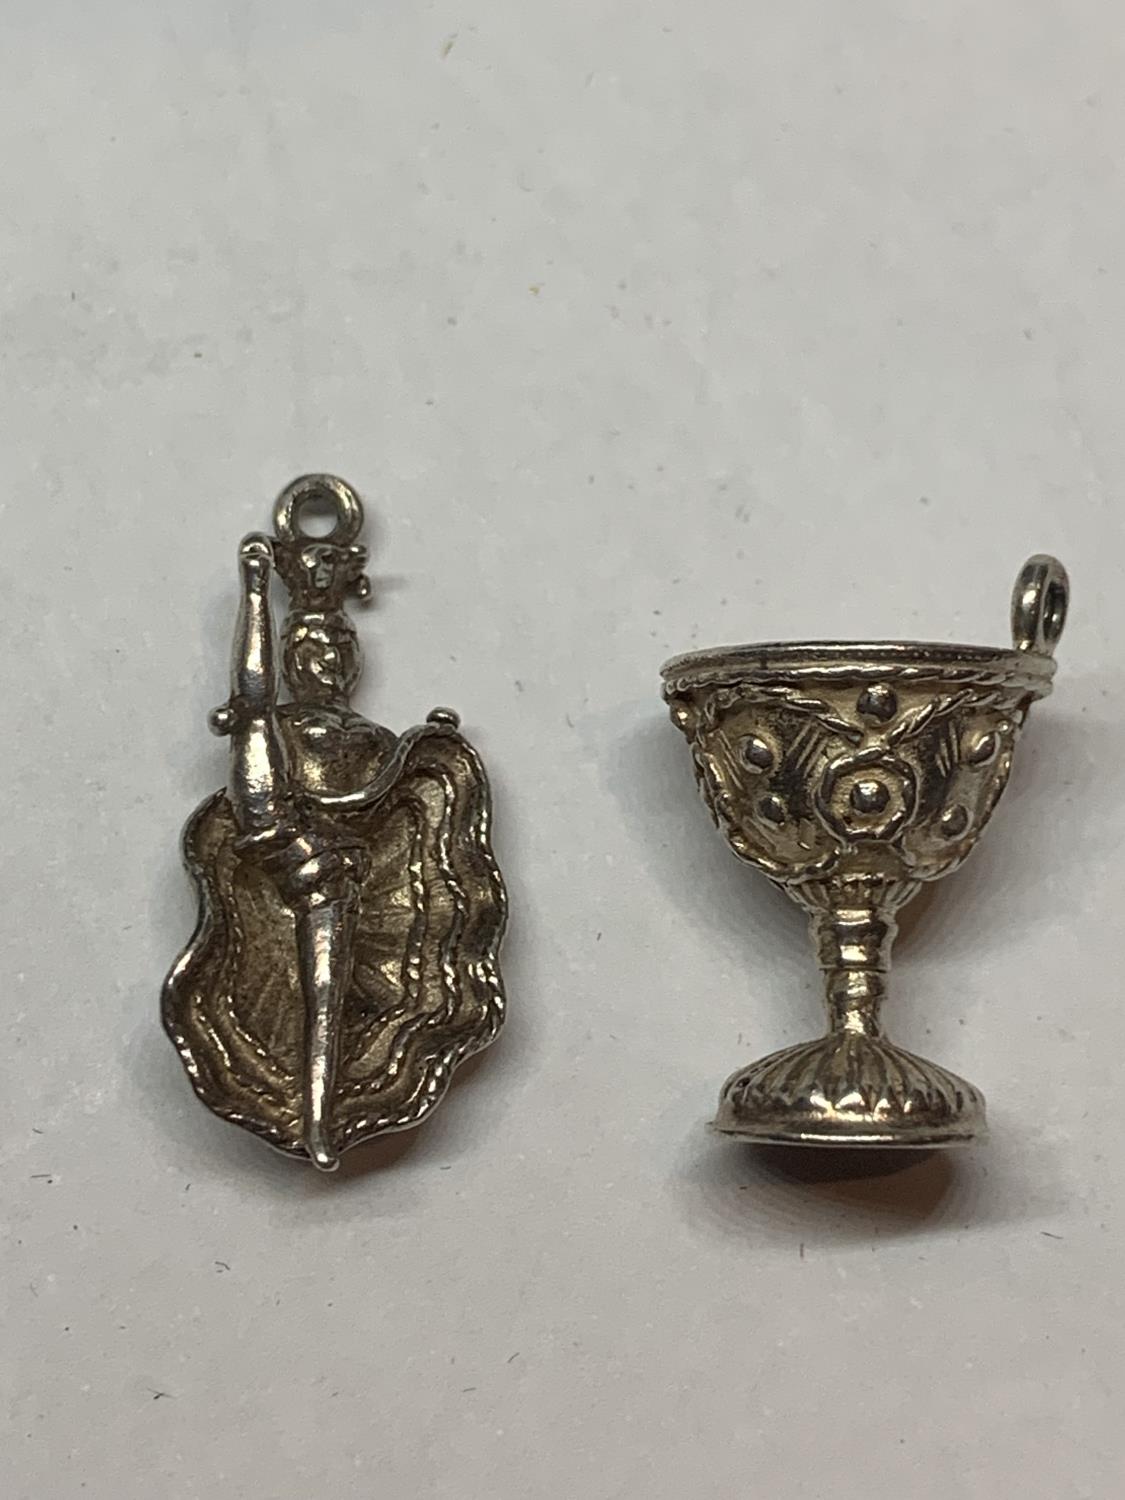 ELEVEN VARIOUS SILVER CHARMS TO INCLUDE HORSES, MOULIN ROUGE DANCER, DOG, TRAIN CHURCH ETC - Image 5 of 5